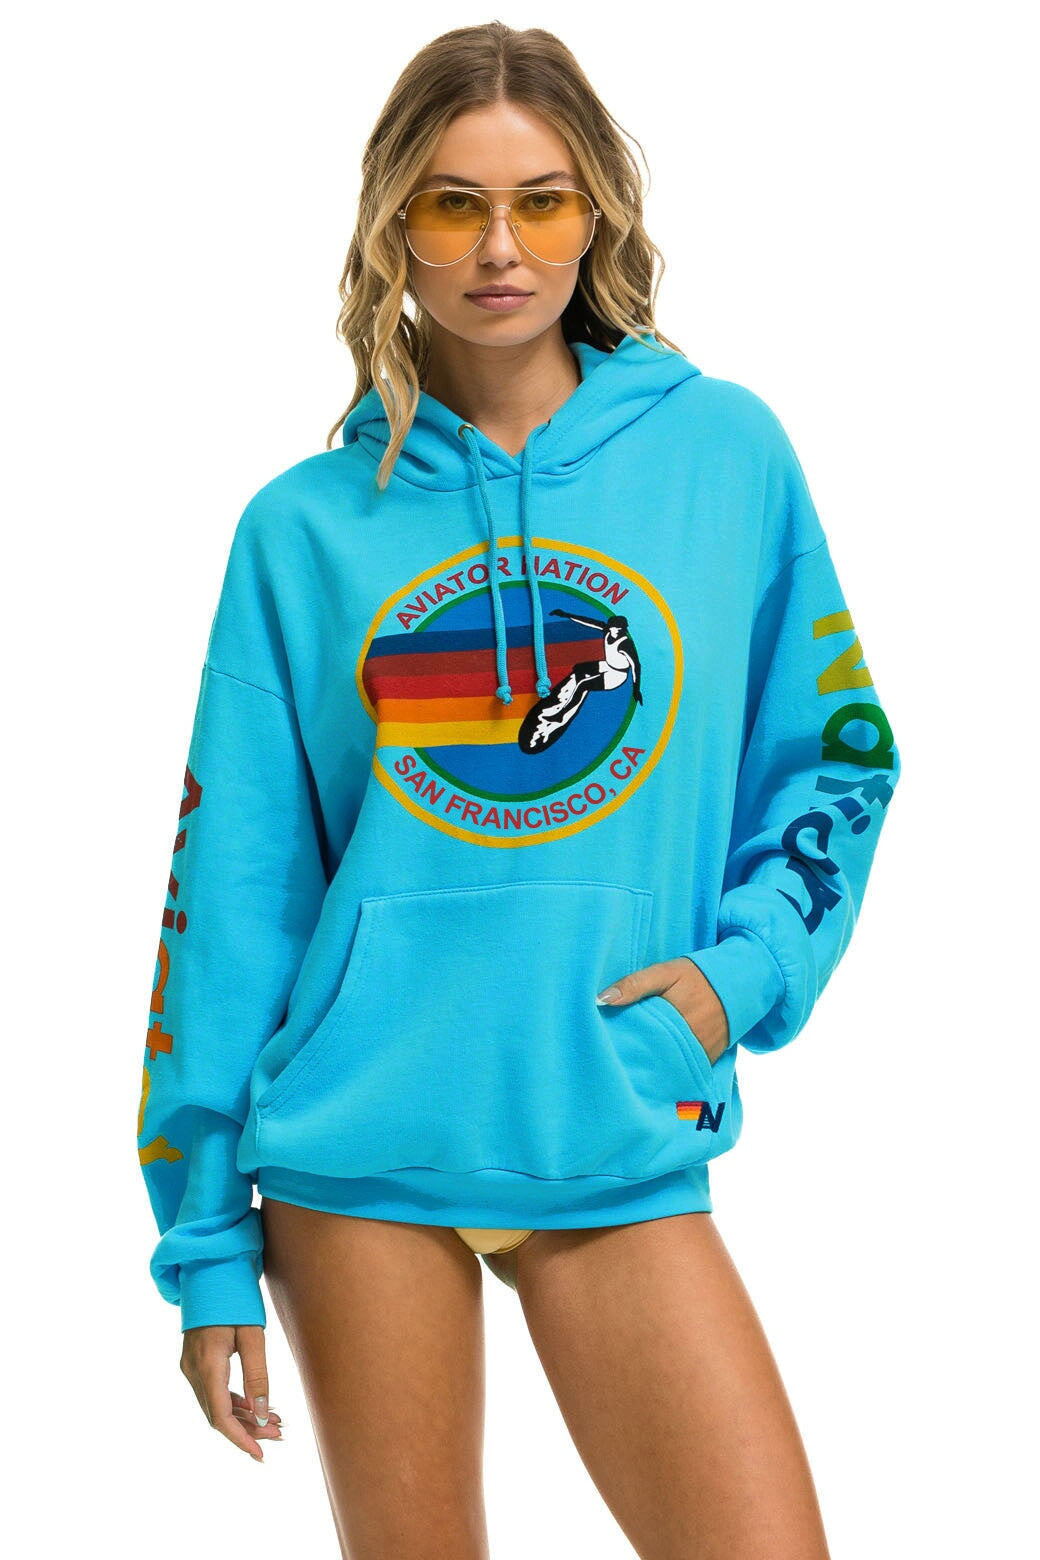 AVIATOR NATION SAN FRANCISCO RELAXED PULLOVER HOODIE - NEON BLUE Hoodie Aviator Nation 